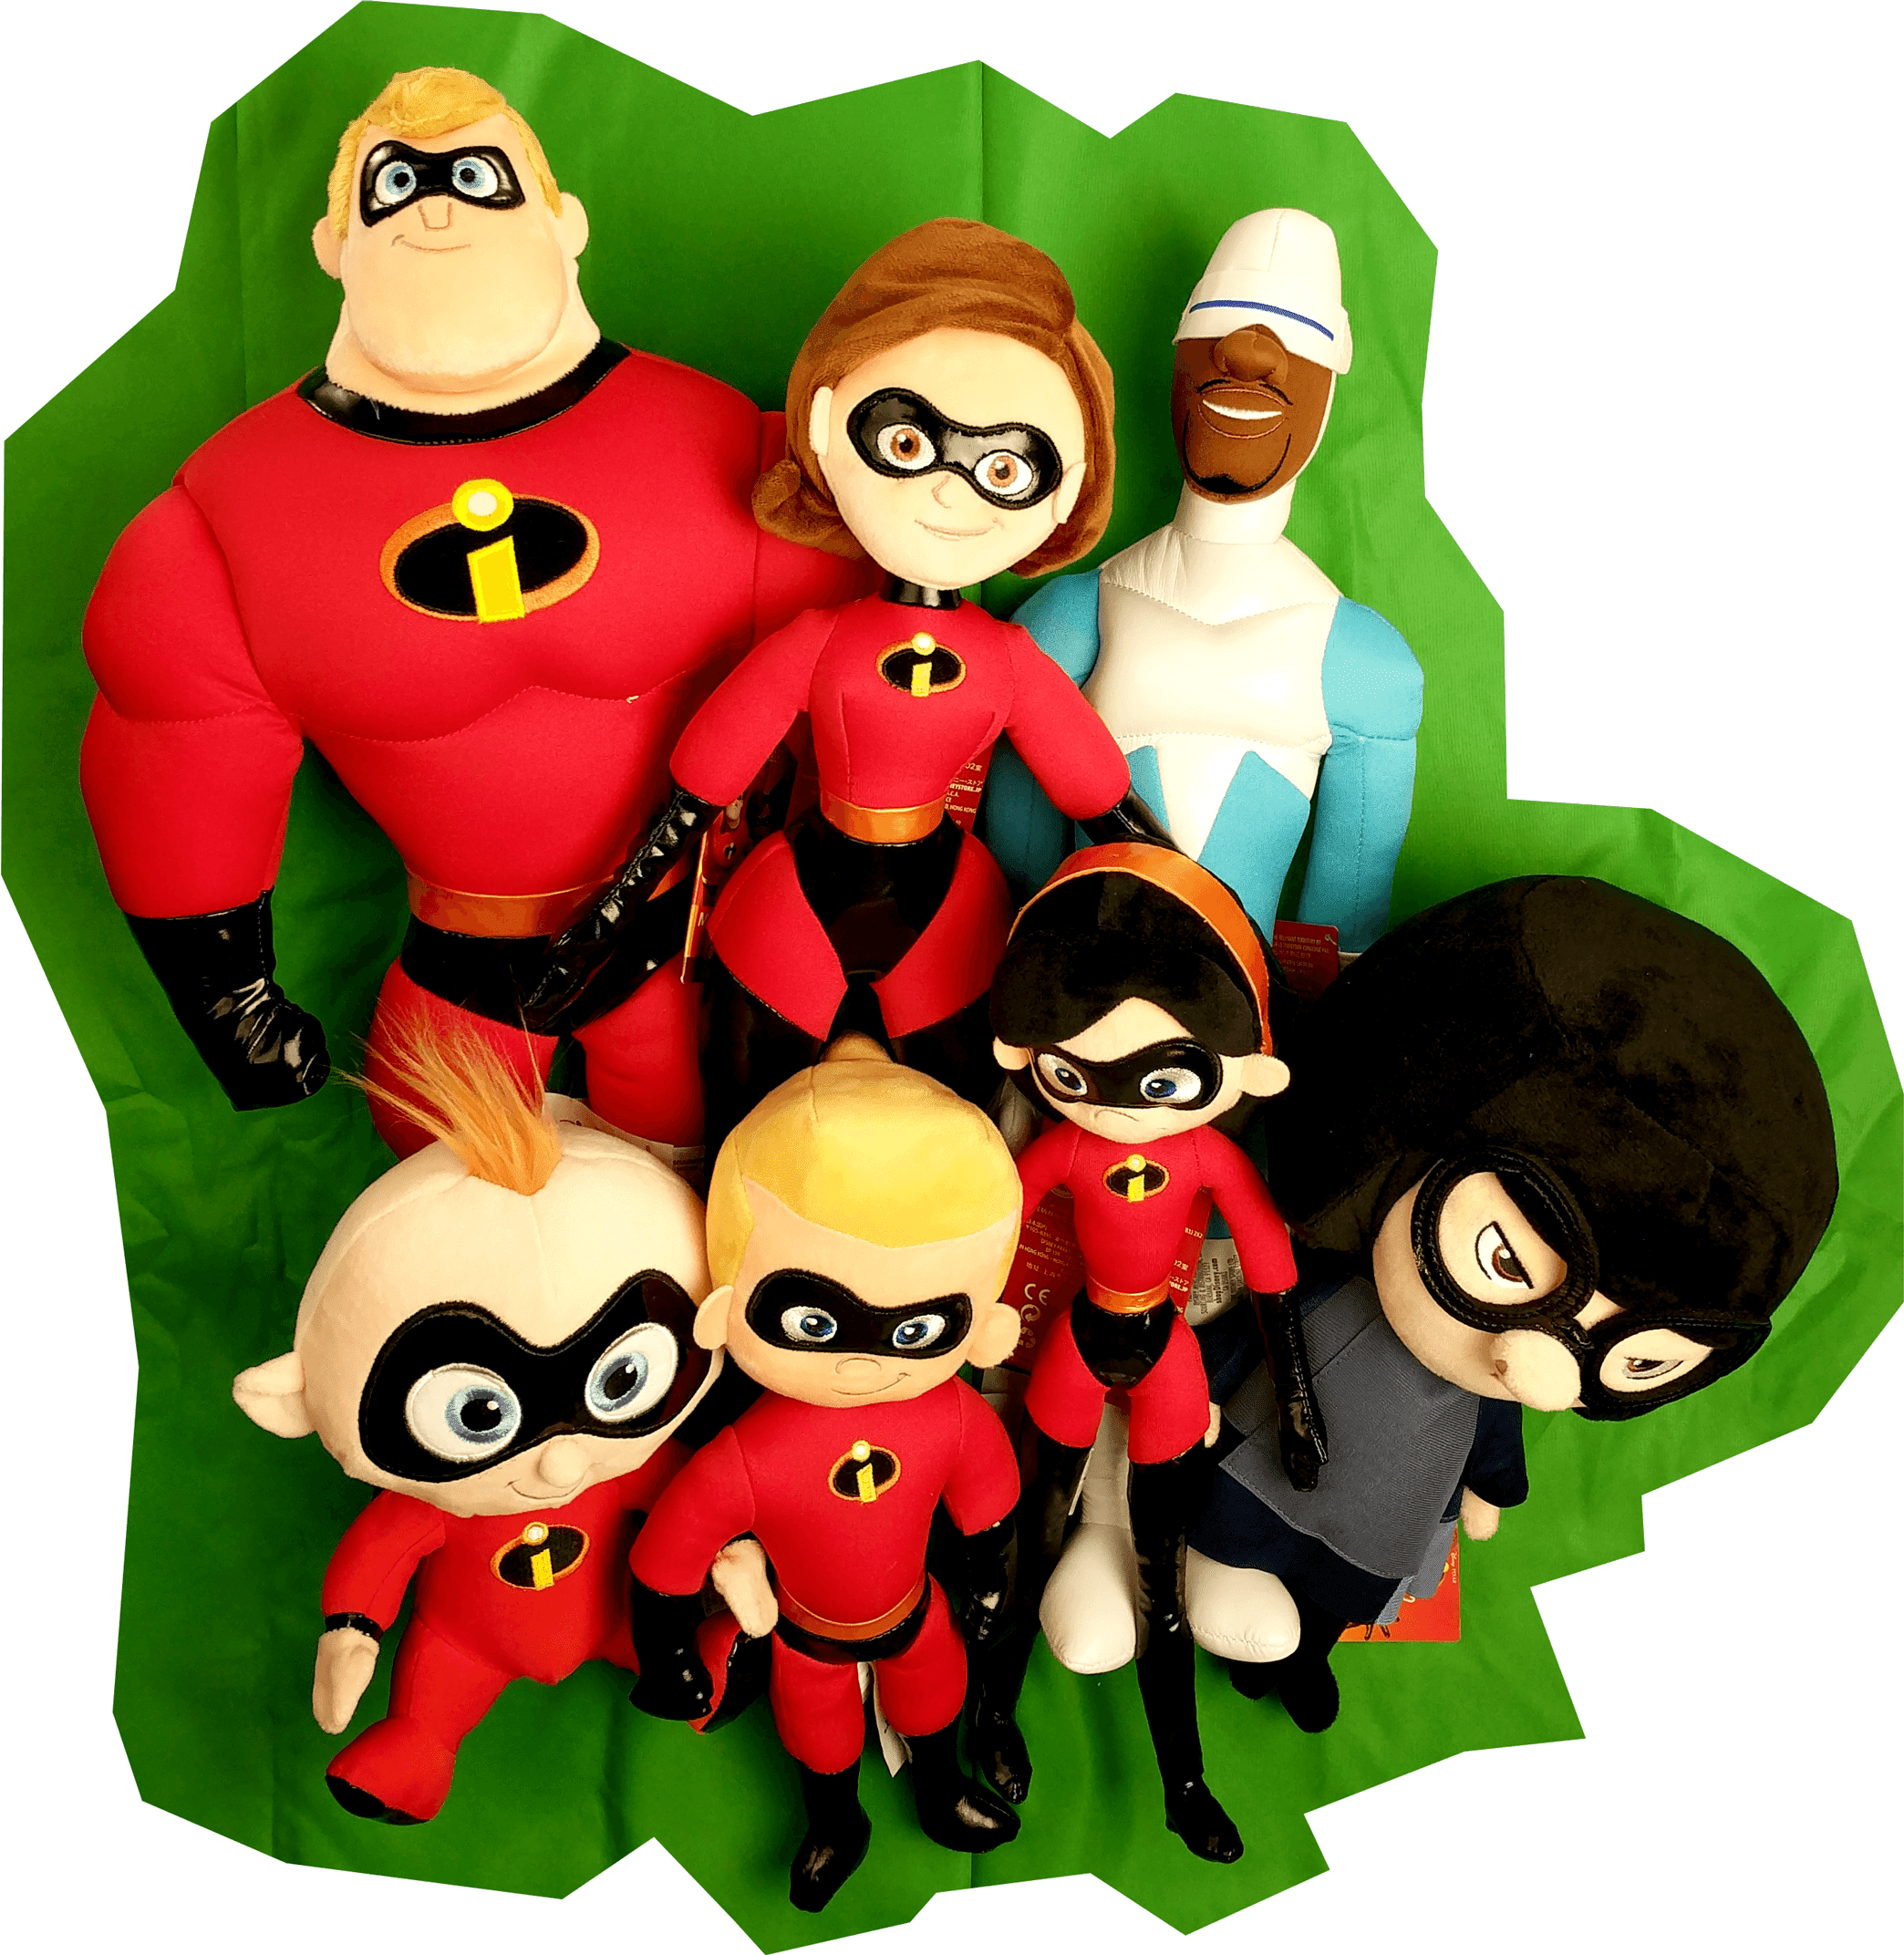 The Incredibles Disney Pixar Edna Mode Adult Accessory Kit